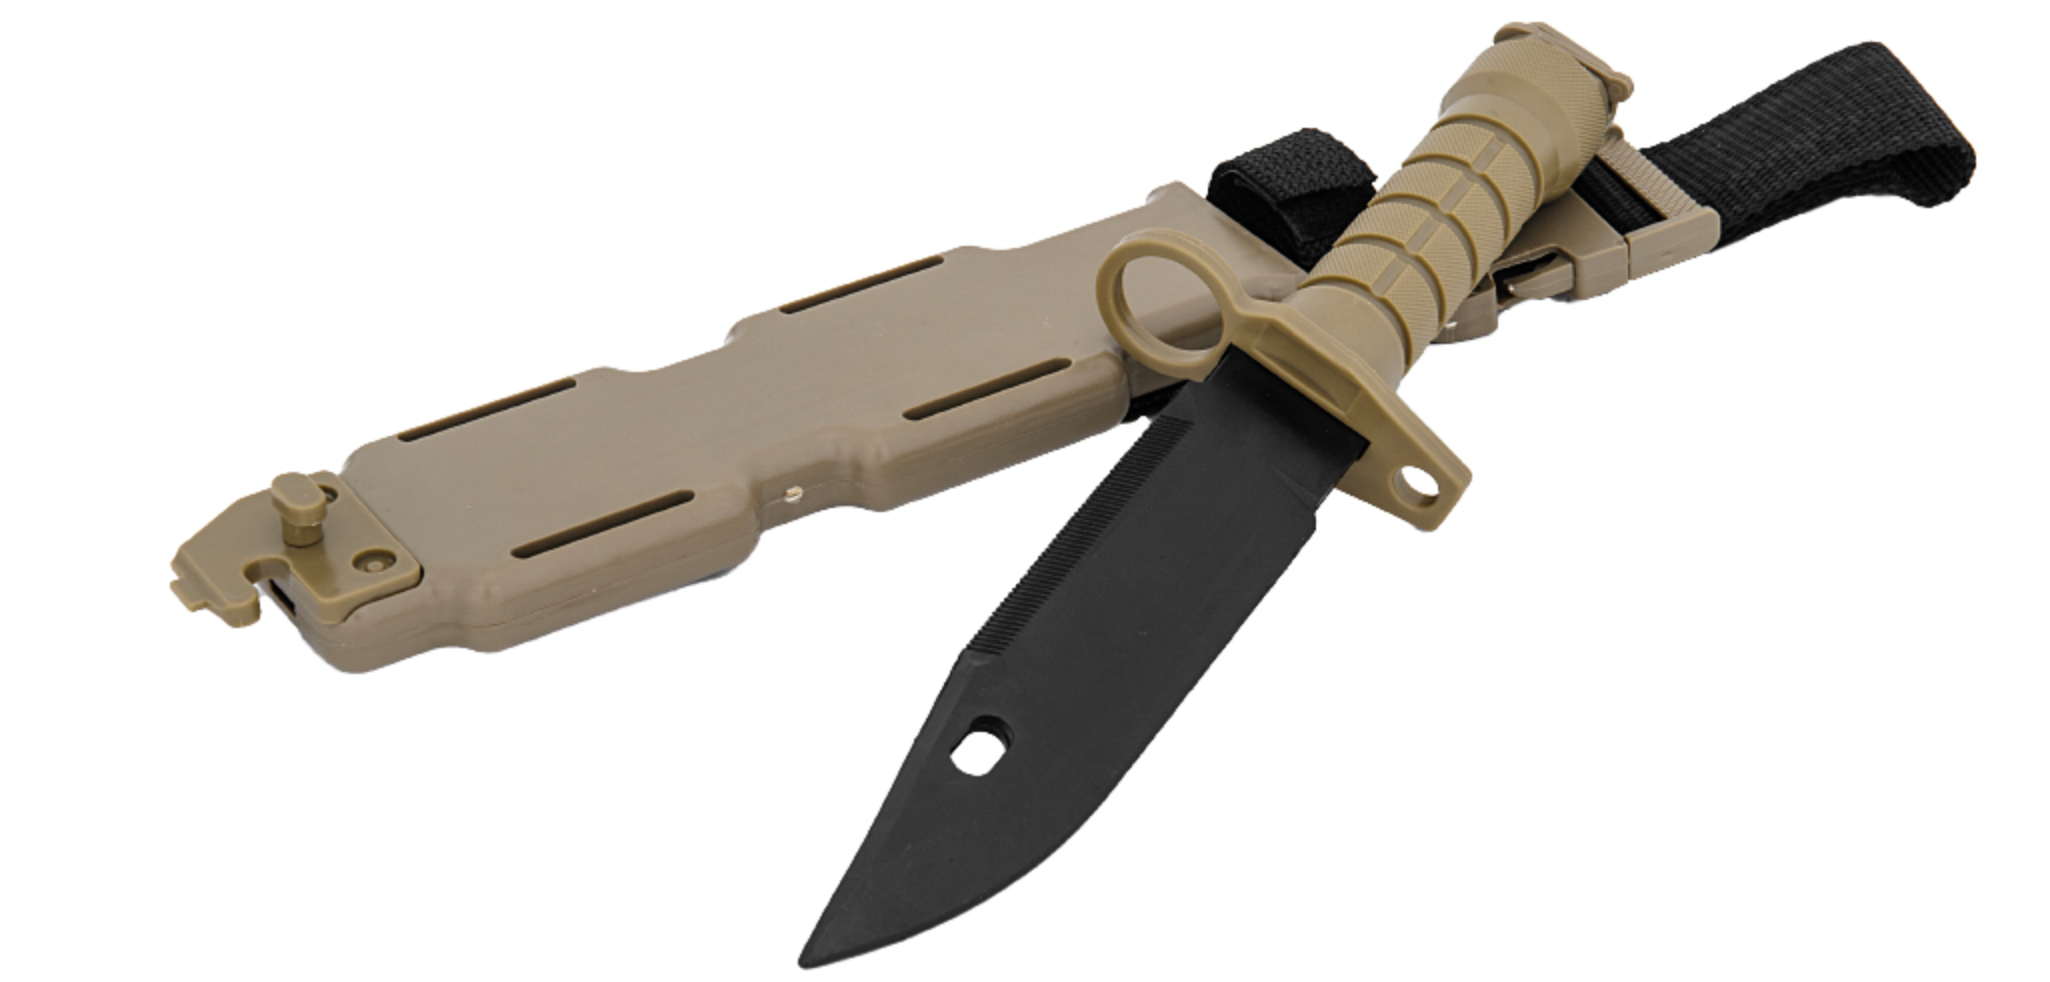 Lancer Tactical Airsoft M9 Rubber Bayonet Knife for M4/M16 AEG